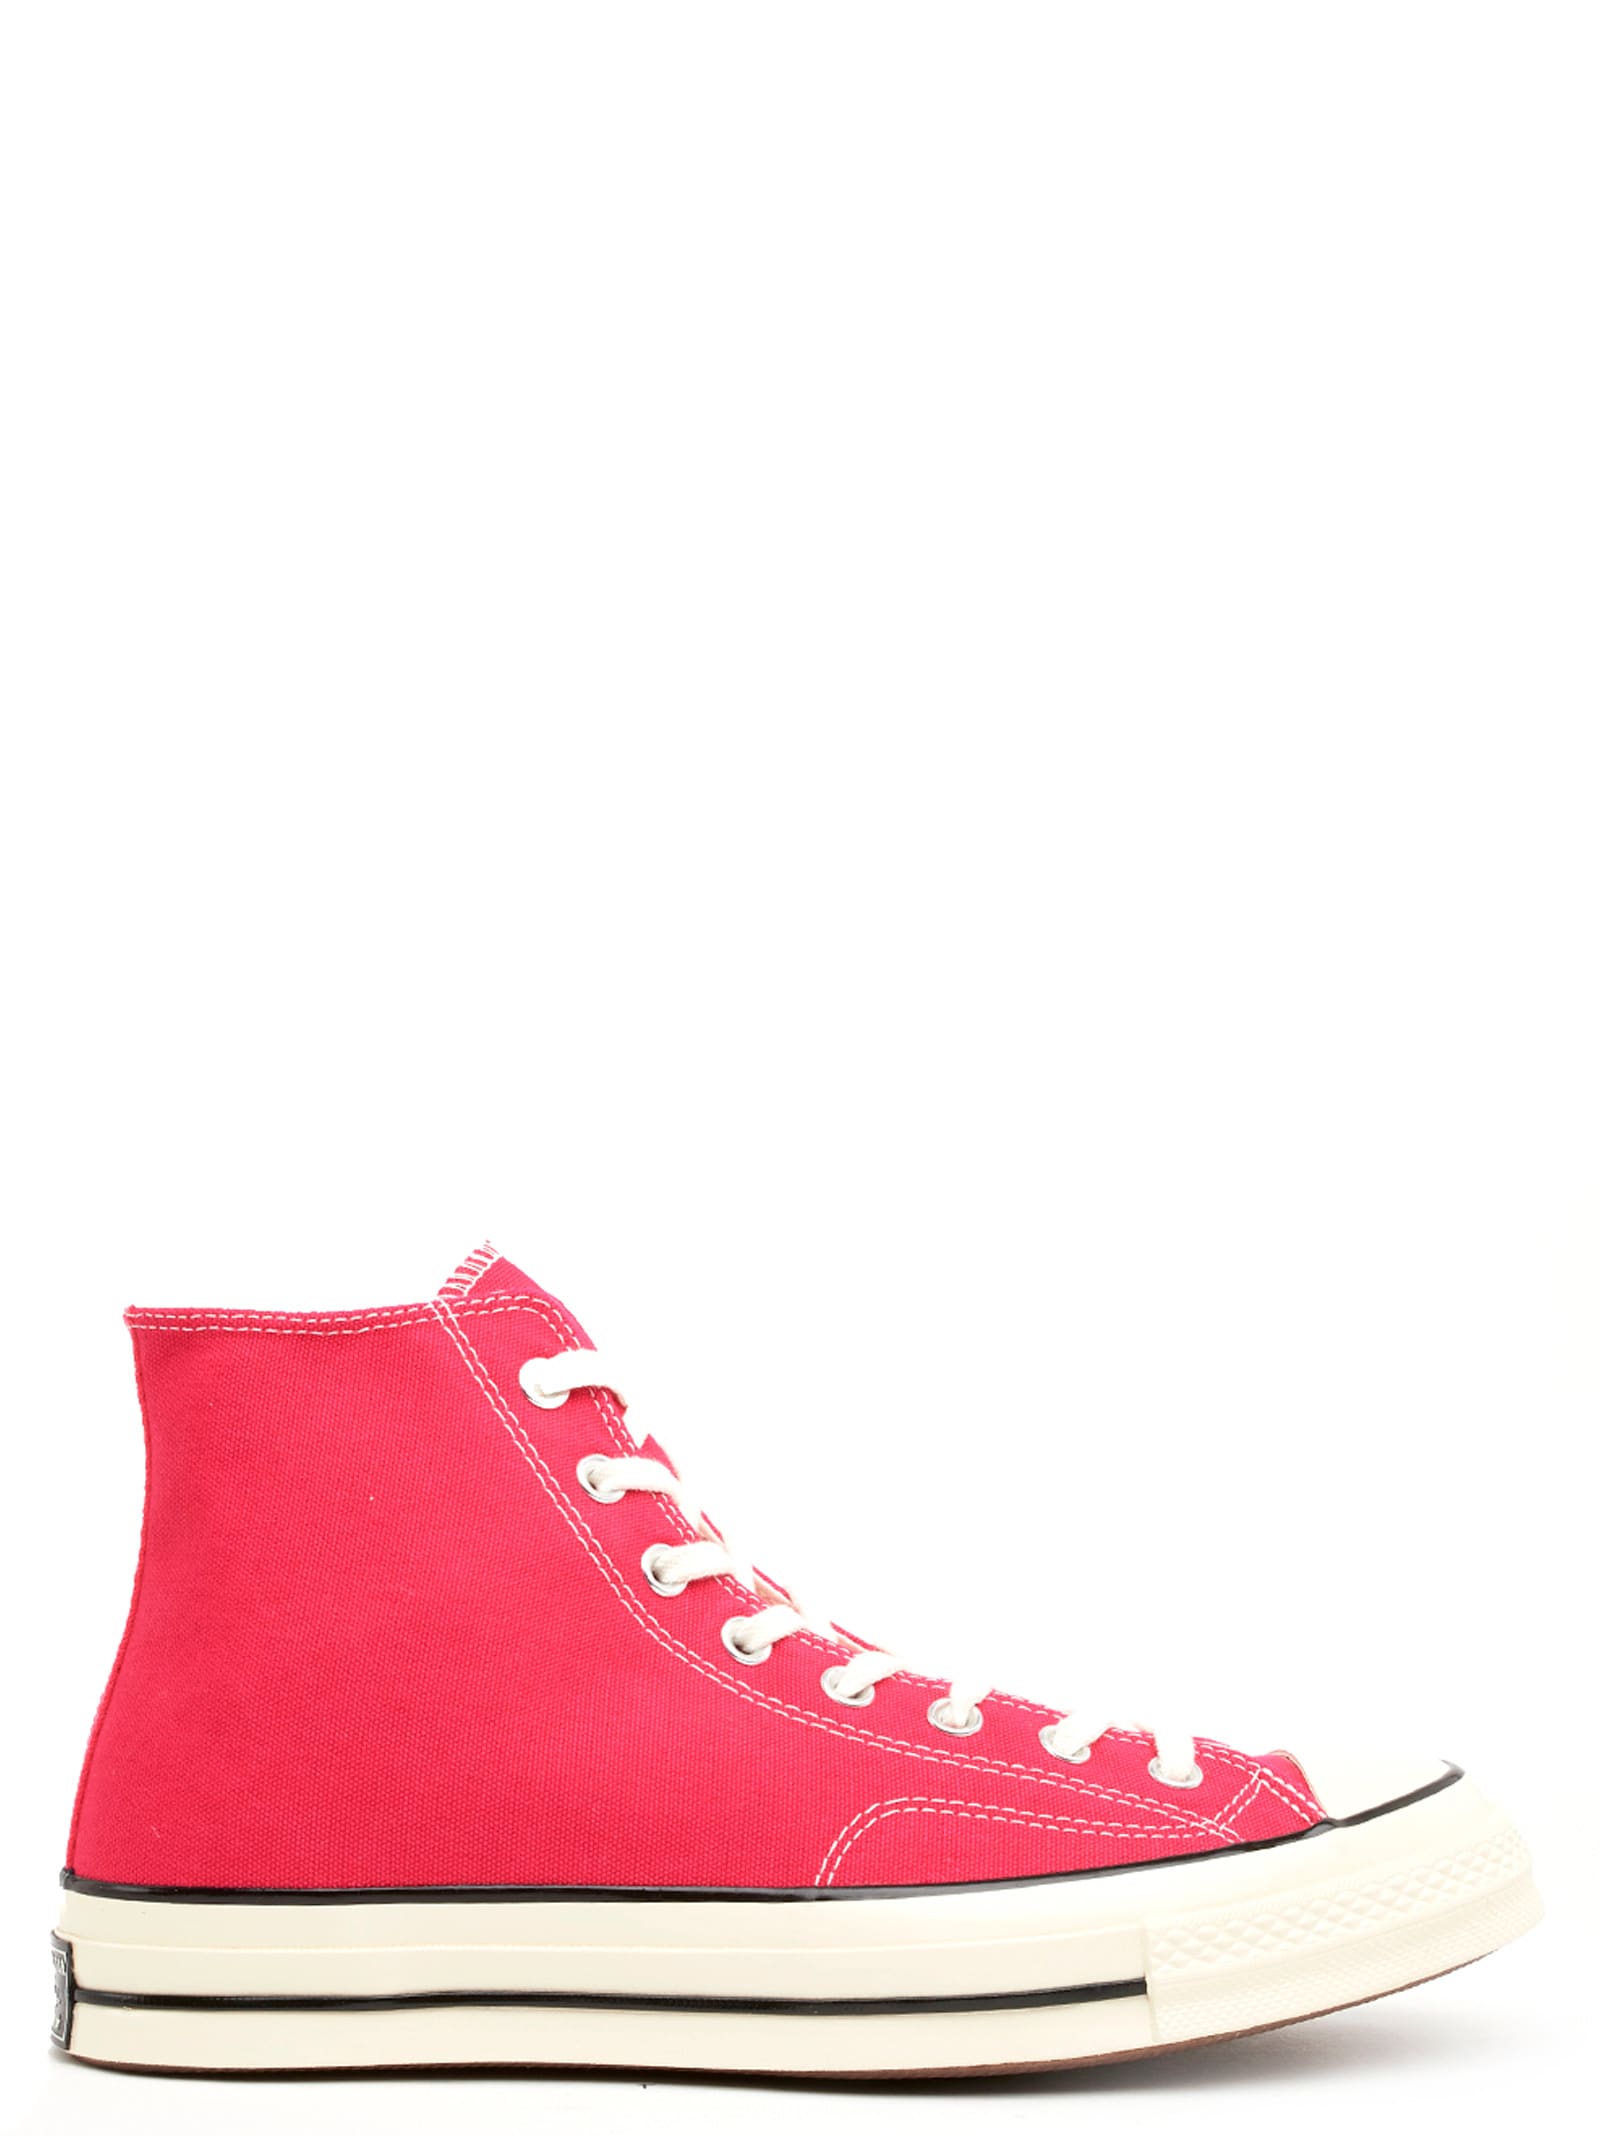 converse 1970s red